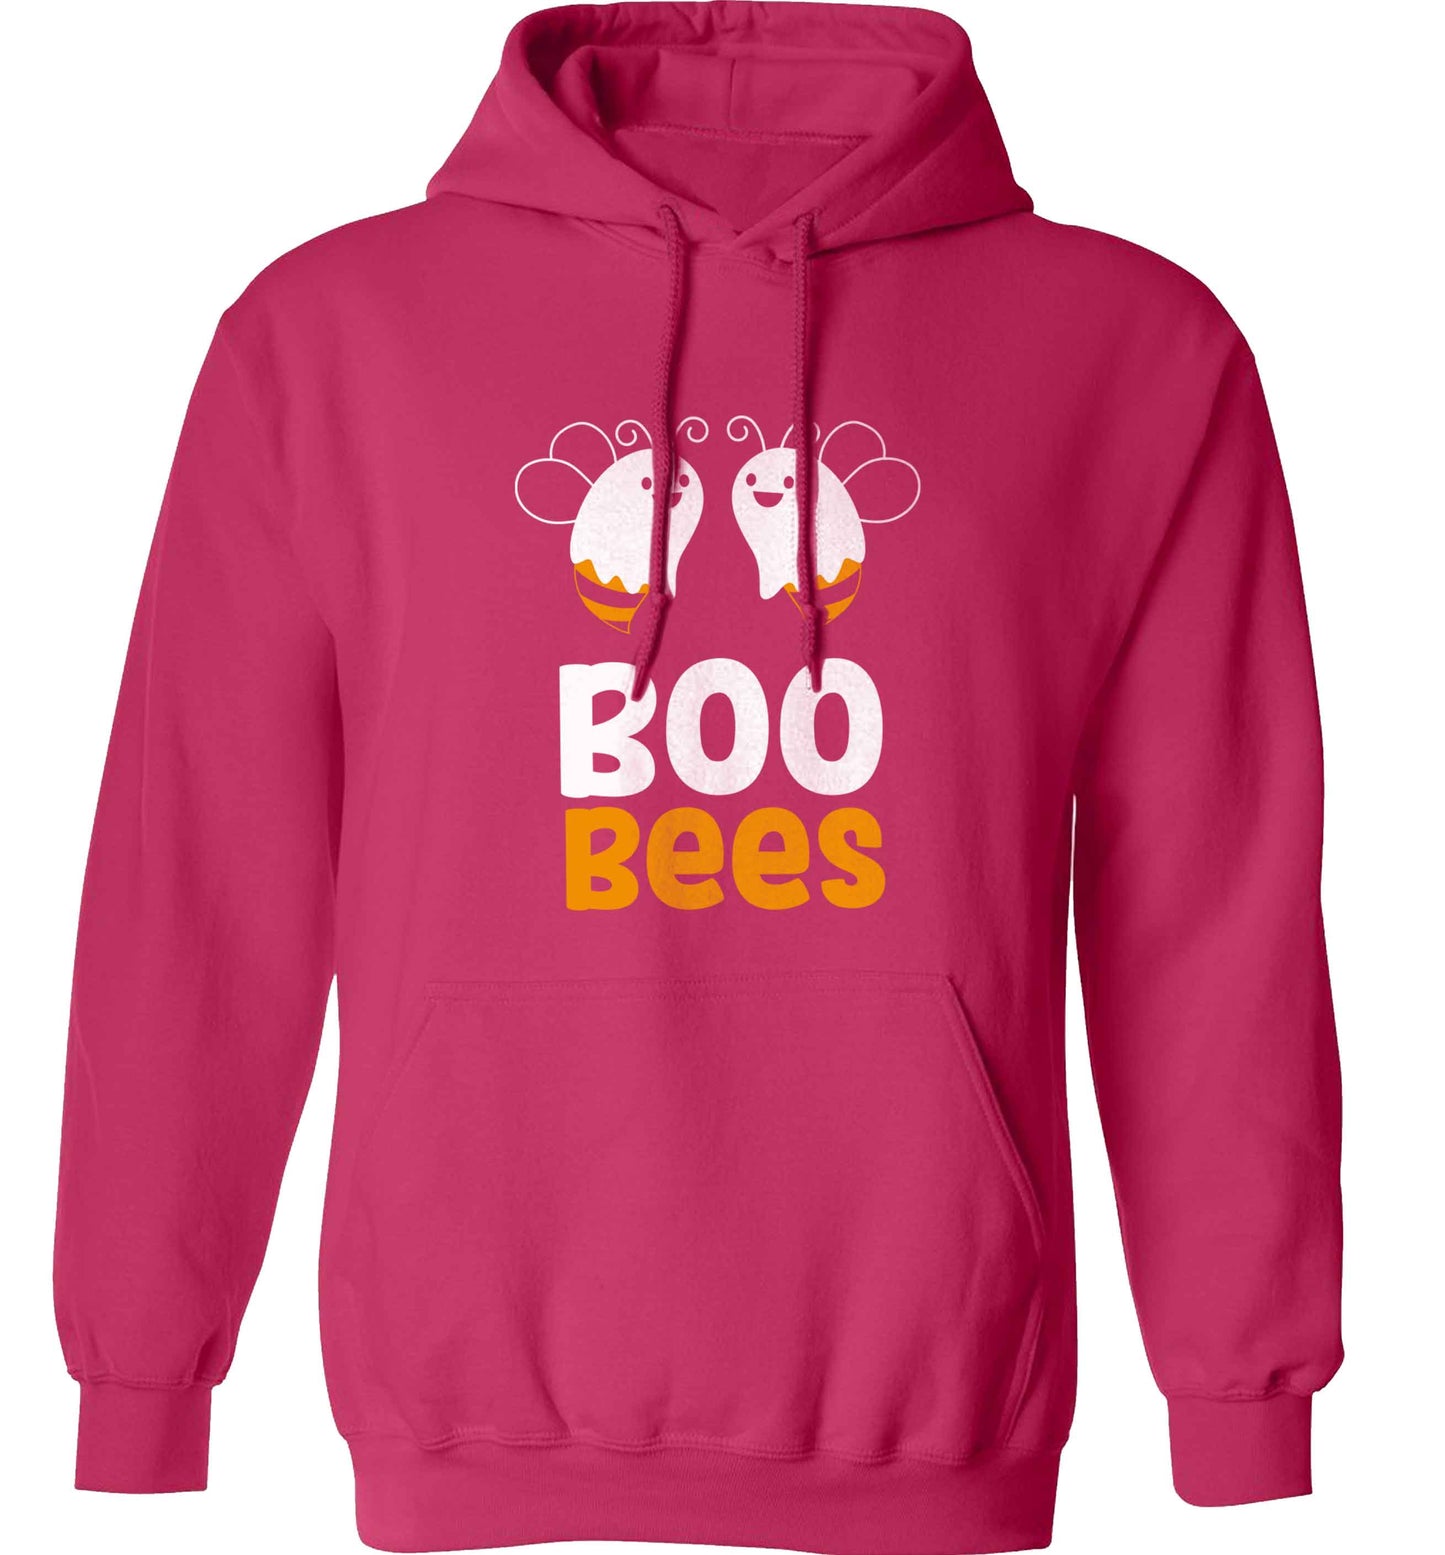 Boo bees Kit adults unisex pink hoodie 2XL